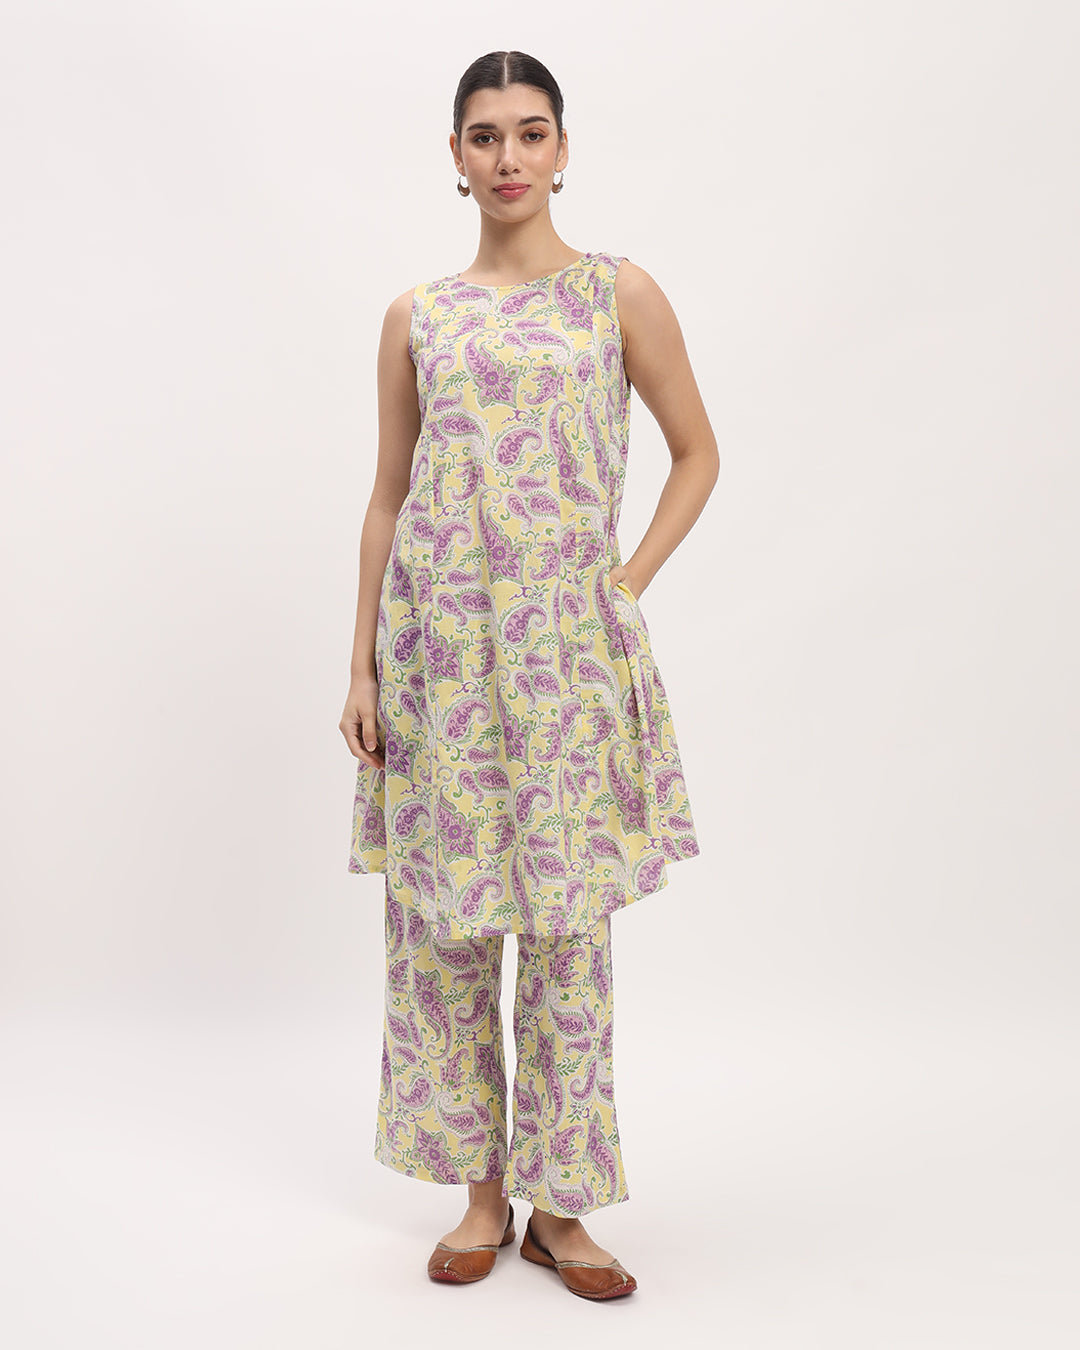 Combo: English Floral Tracks & Lavender Paisley Sleeveless A-Line Printed Kurta (Without Bottoms)